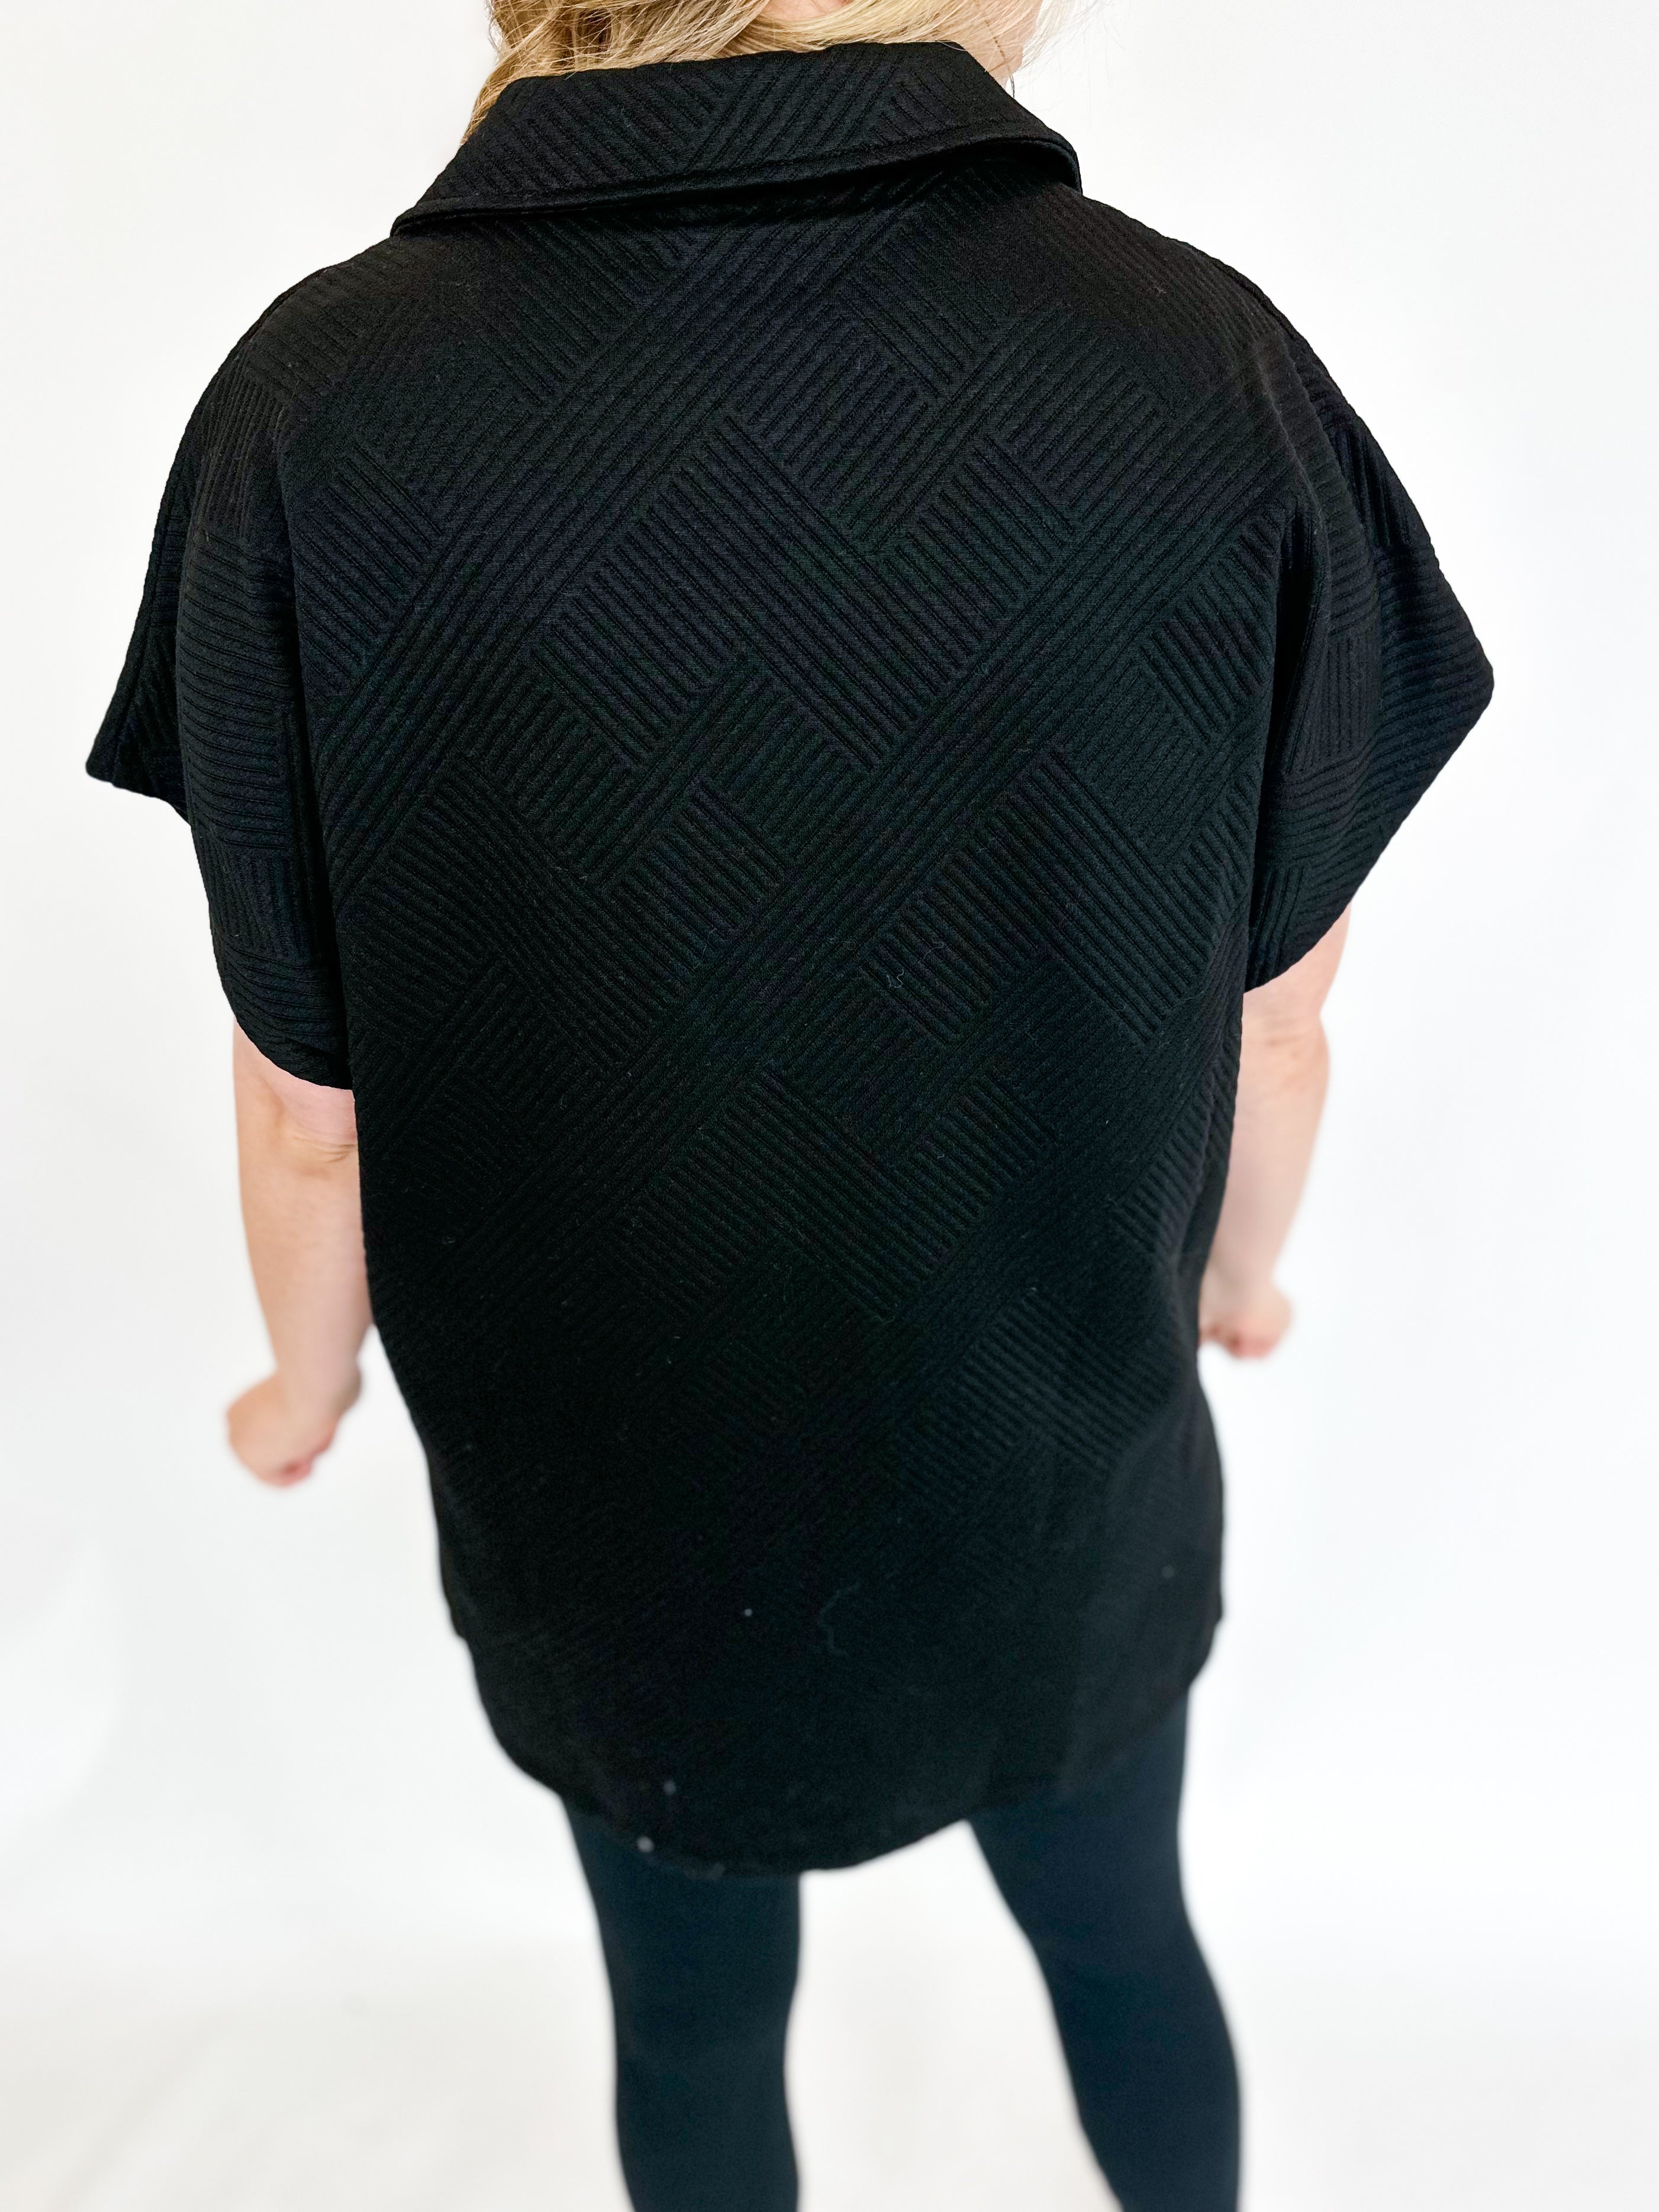 Textured Tunic - Black-200 Fashion Blouses-SEE AND BE SEEN-July & June Women's Fashion Boutique Located in San Antonio, Texas